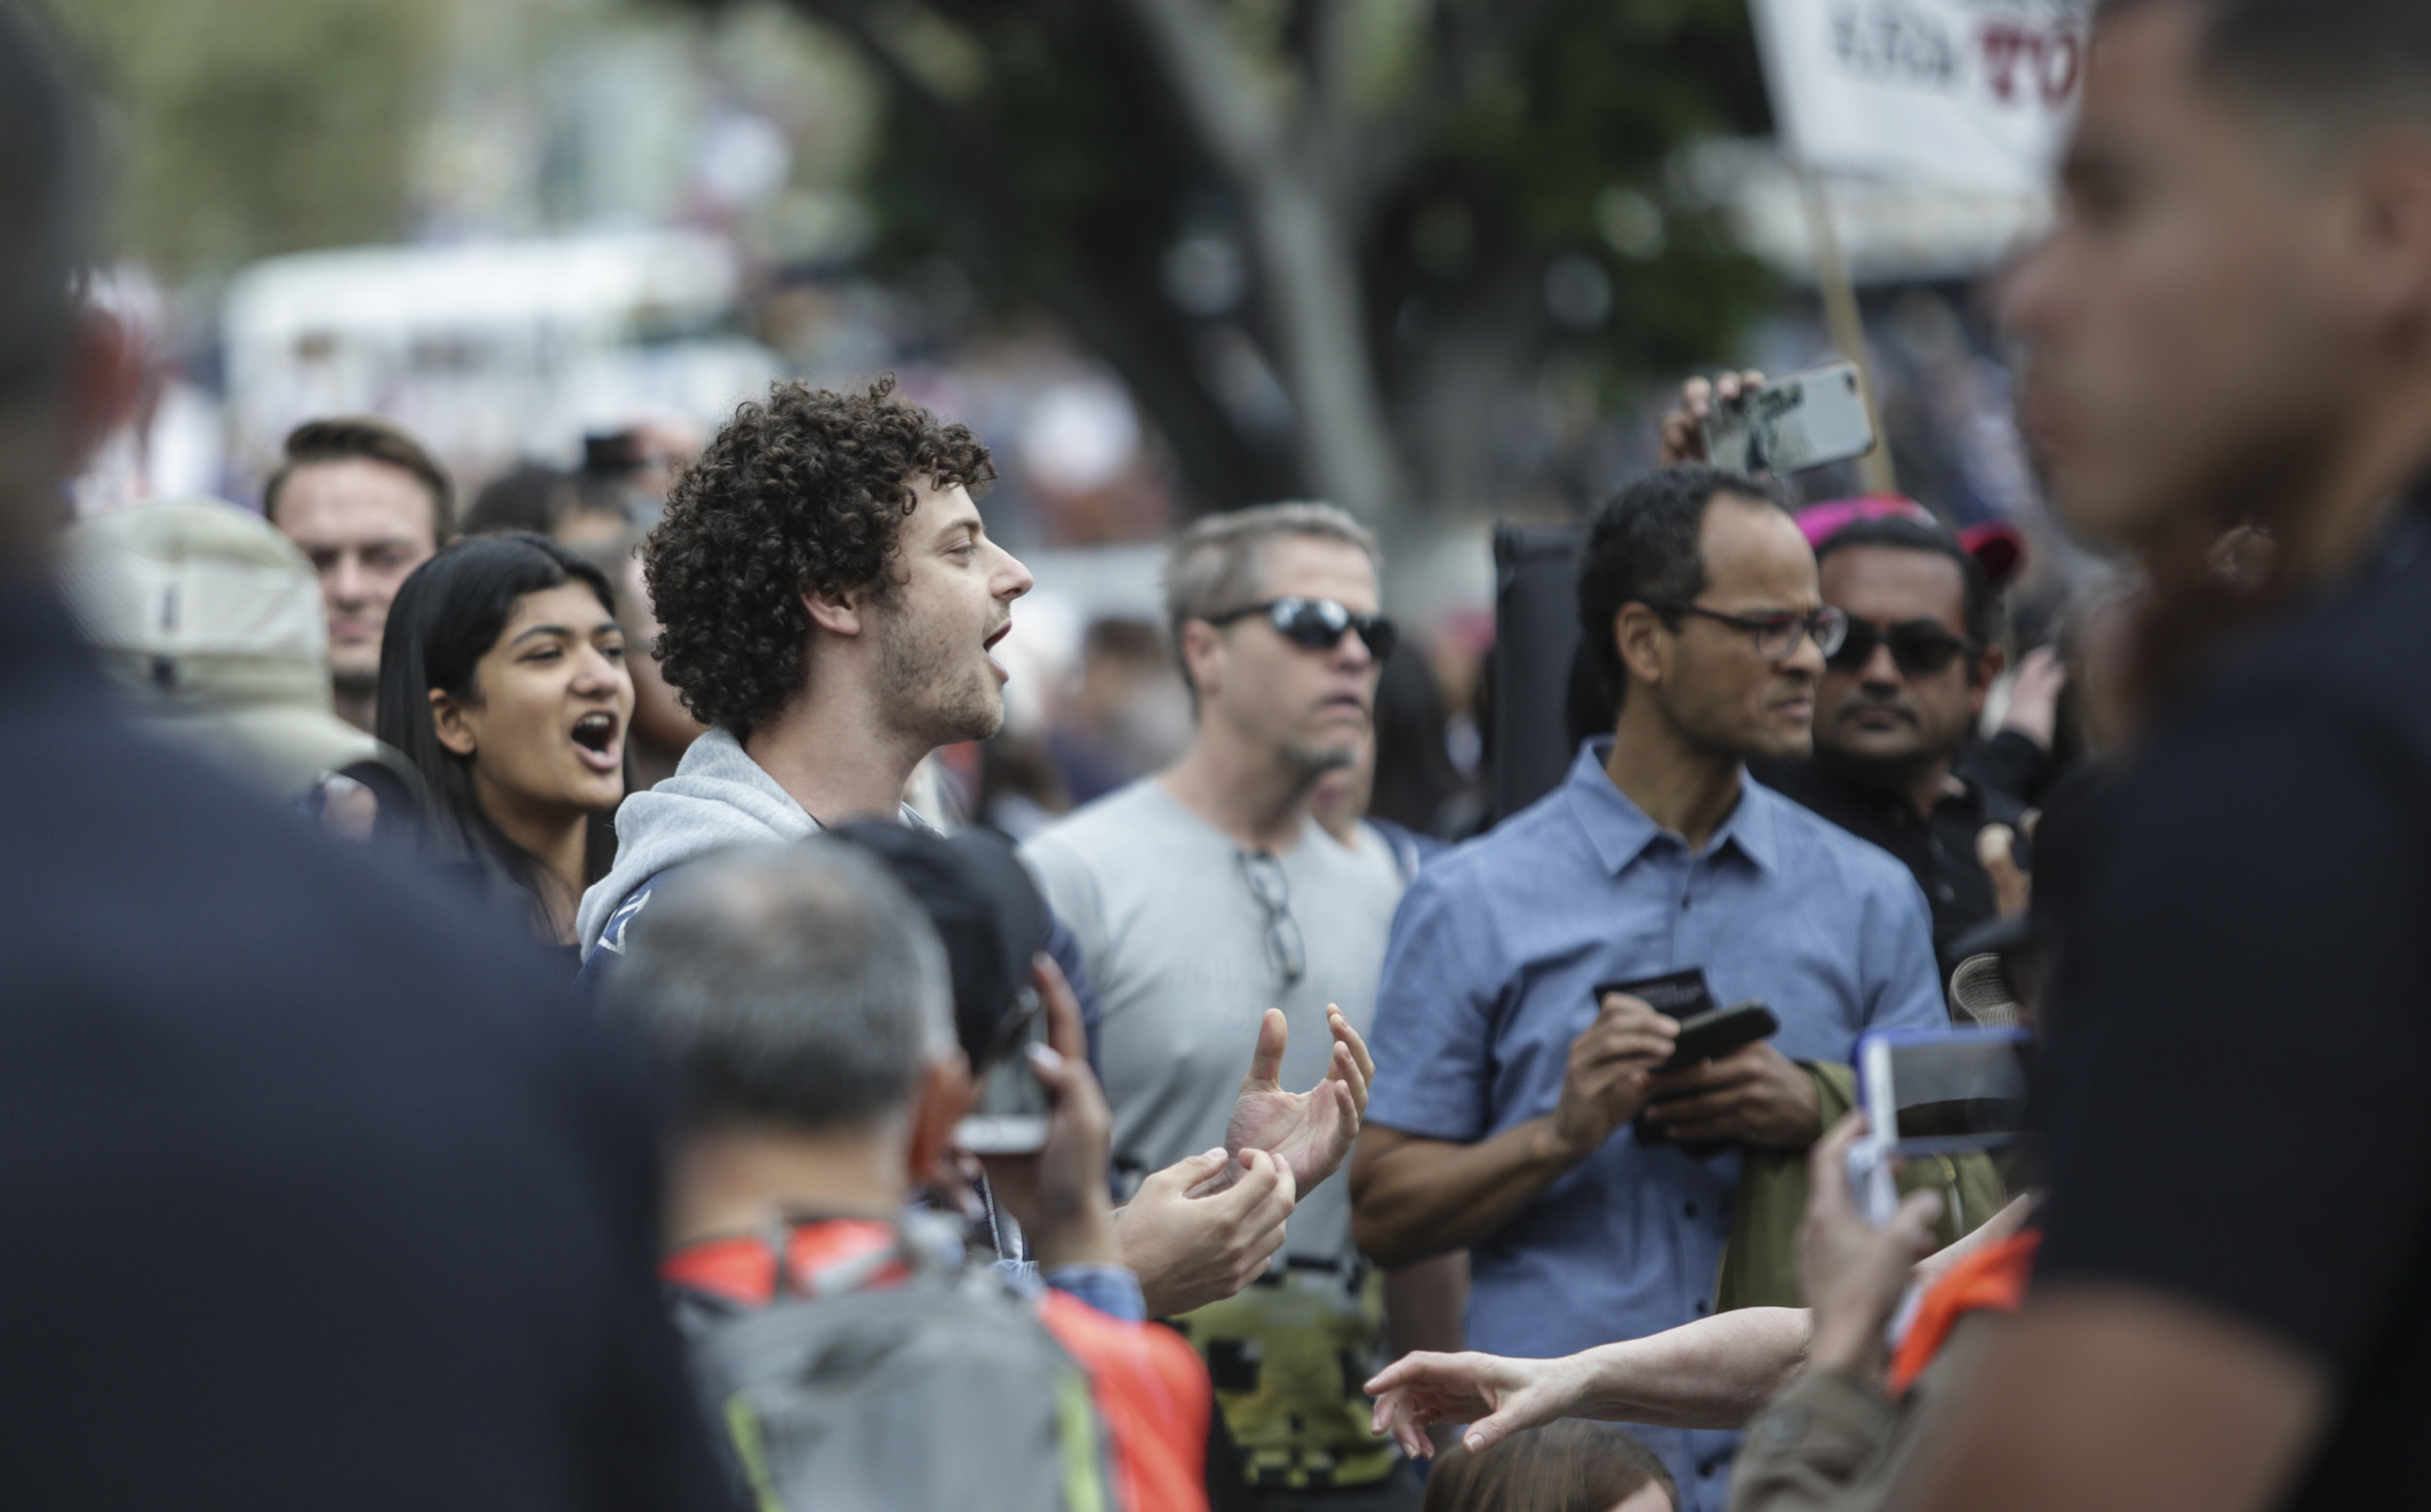  Protesters and counter-protesters clash across police lines at the March for Life. The march took place between Pershing Square and City Hall in Downtown Los Angeles, California. Tensions were high while debating gun control and solutions to gun vio